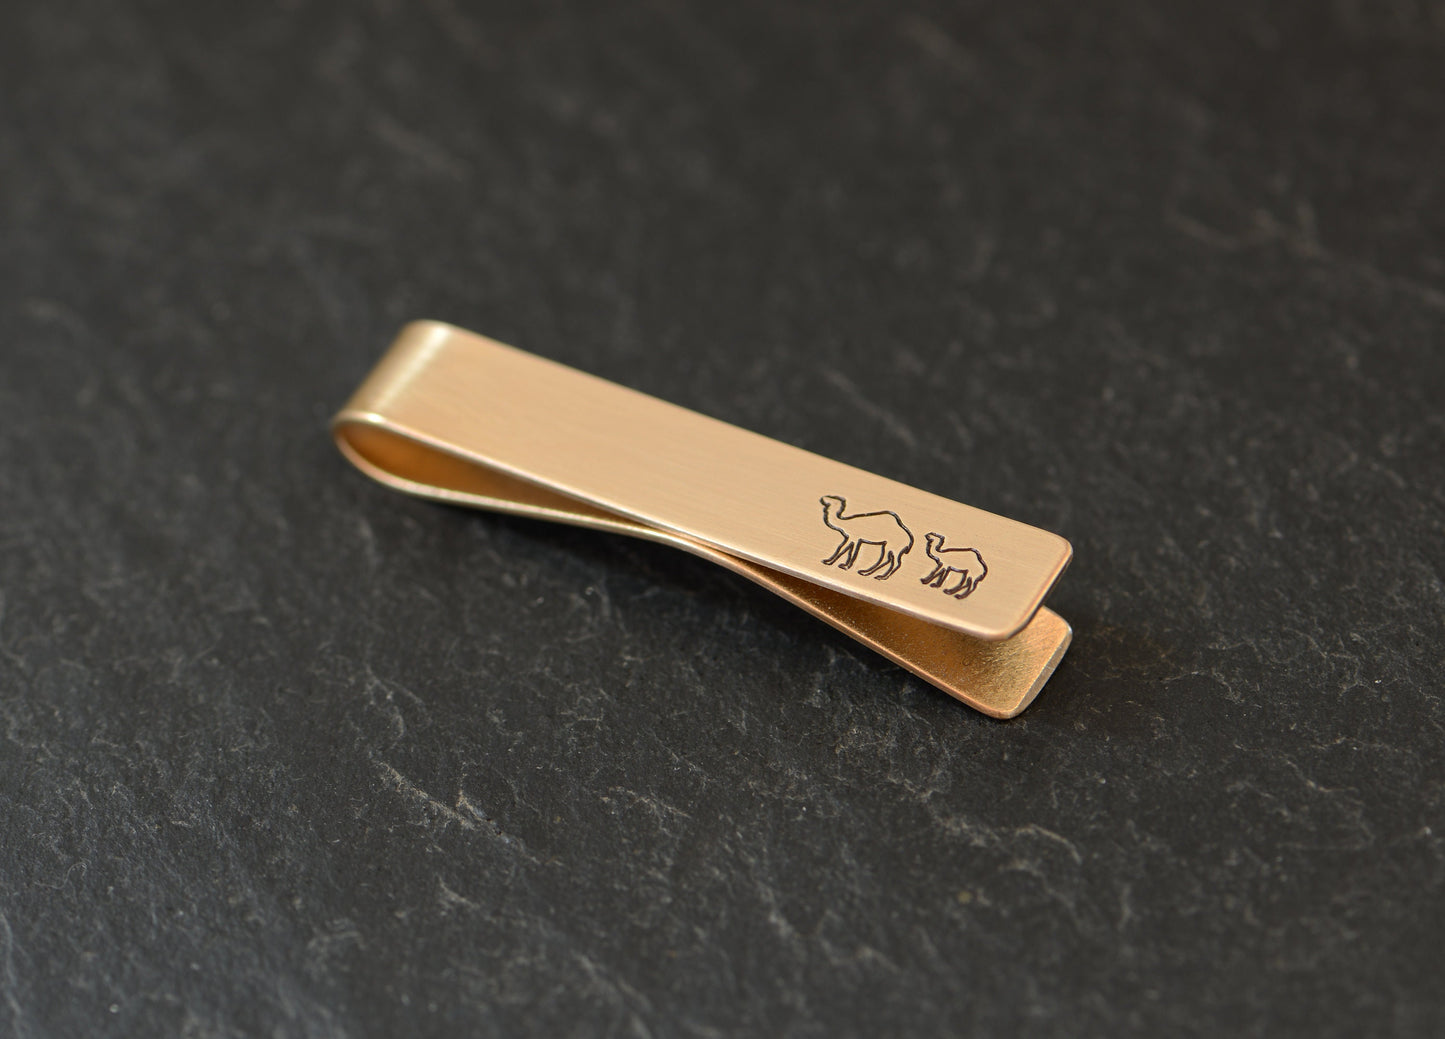 Tie clip in bronze with two camels for getting over hump day